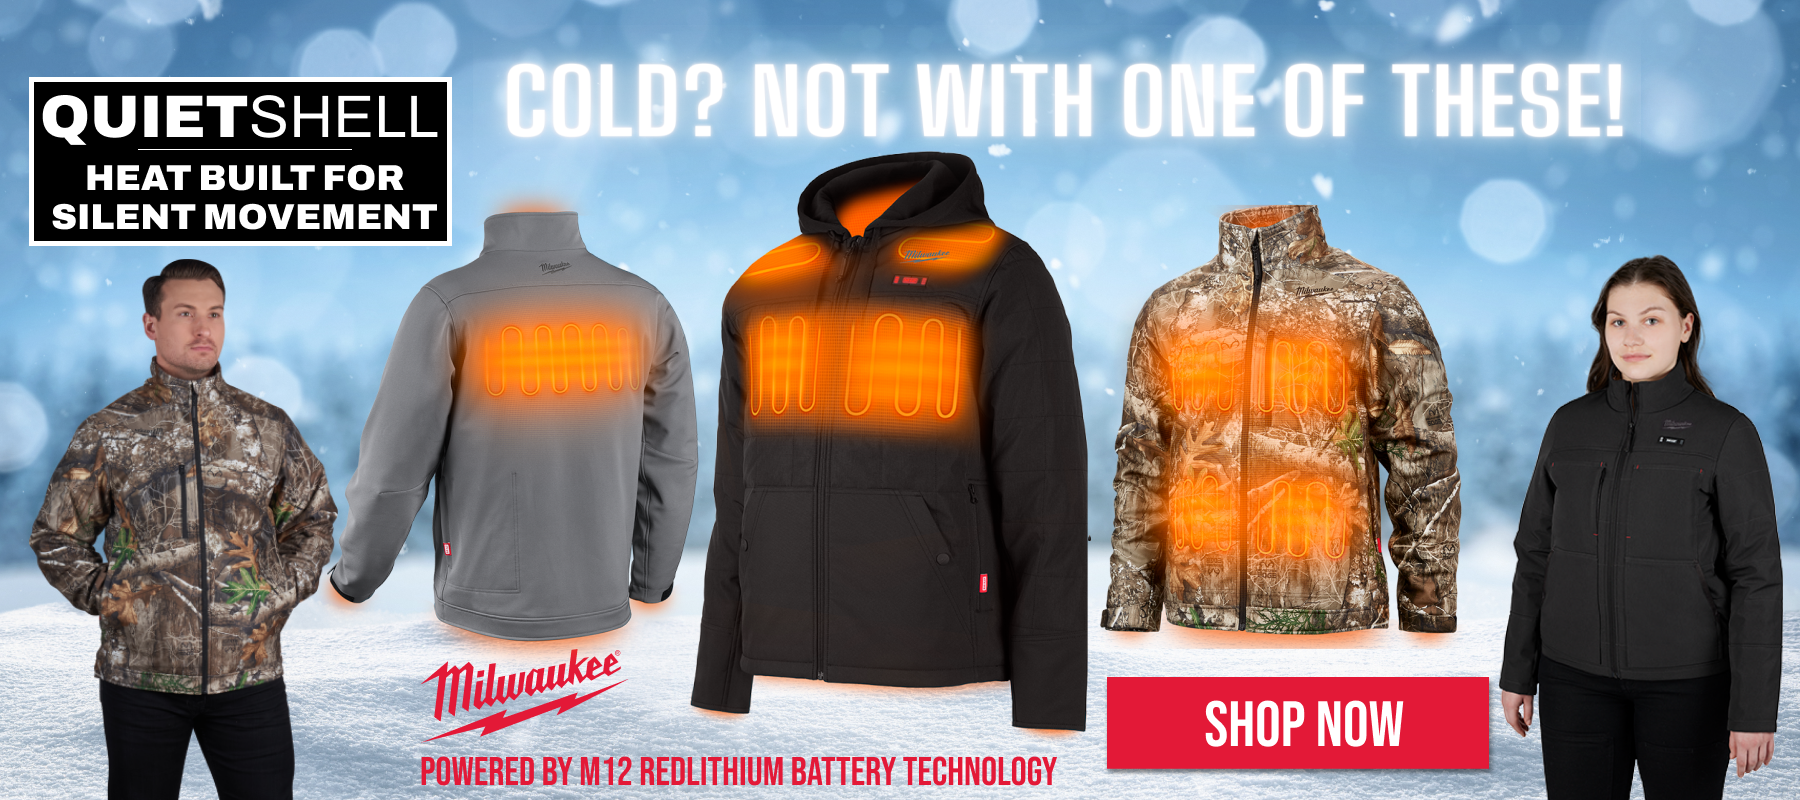 Milwaukee // QuietShell // Heat Built for Silent Movement // Cold? Not with One of These! // Powered By M12 RedLithium Battery Technology // SHOP NOW